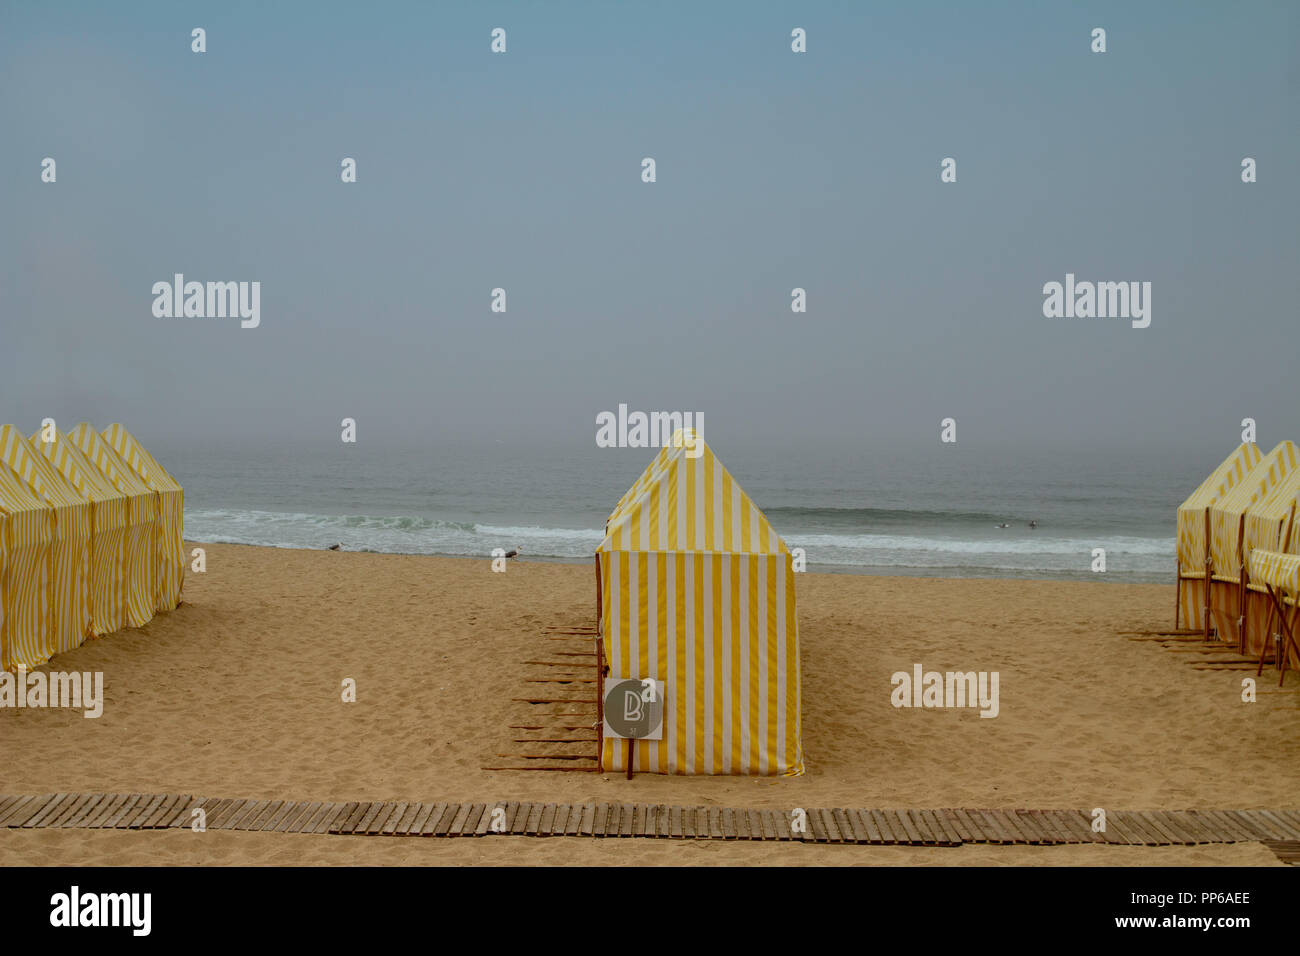 Espinho, Portugal. Deserted beach scene with beach huts and no sign of human activity on a hazy sunny day. Stock Photo